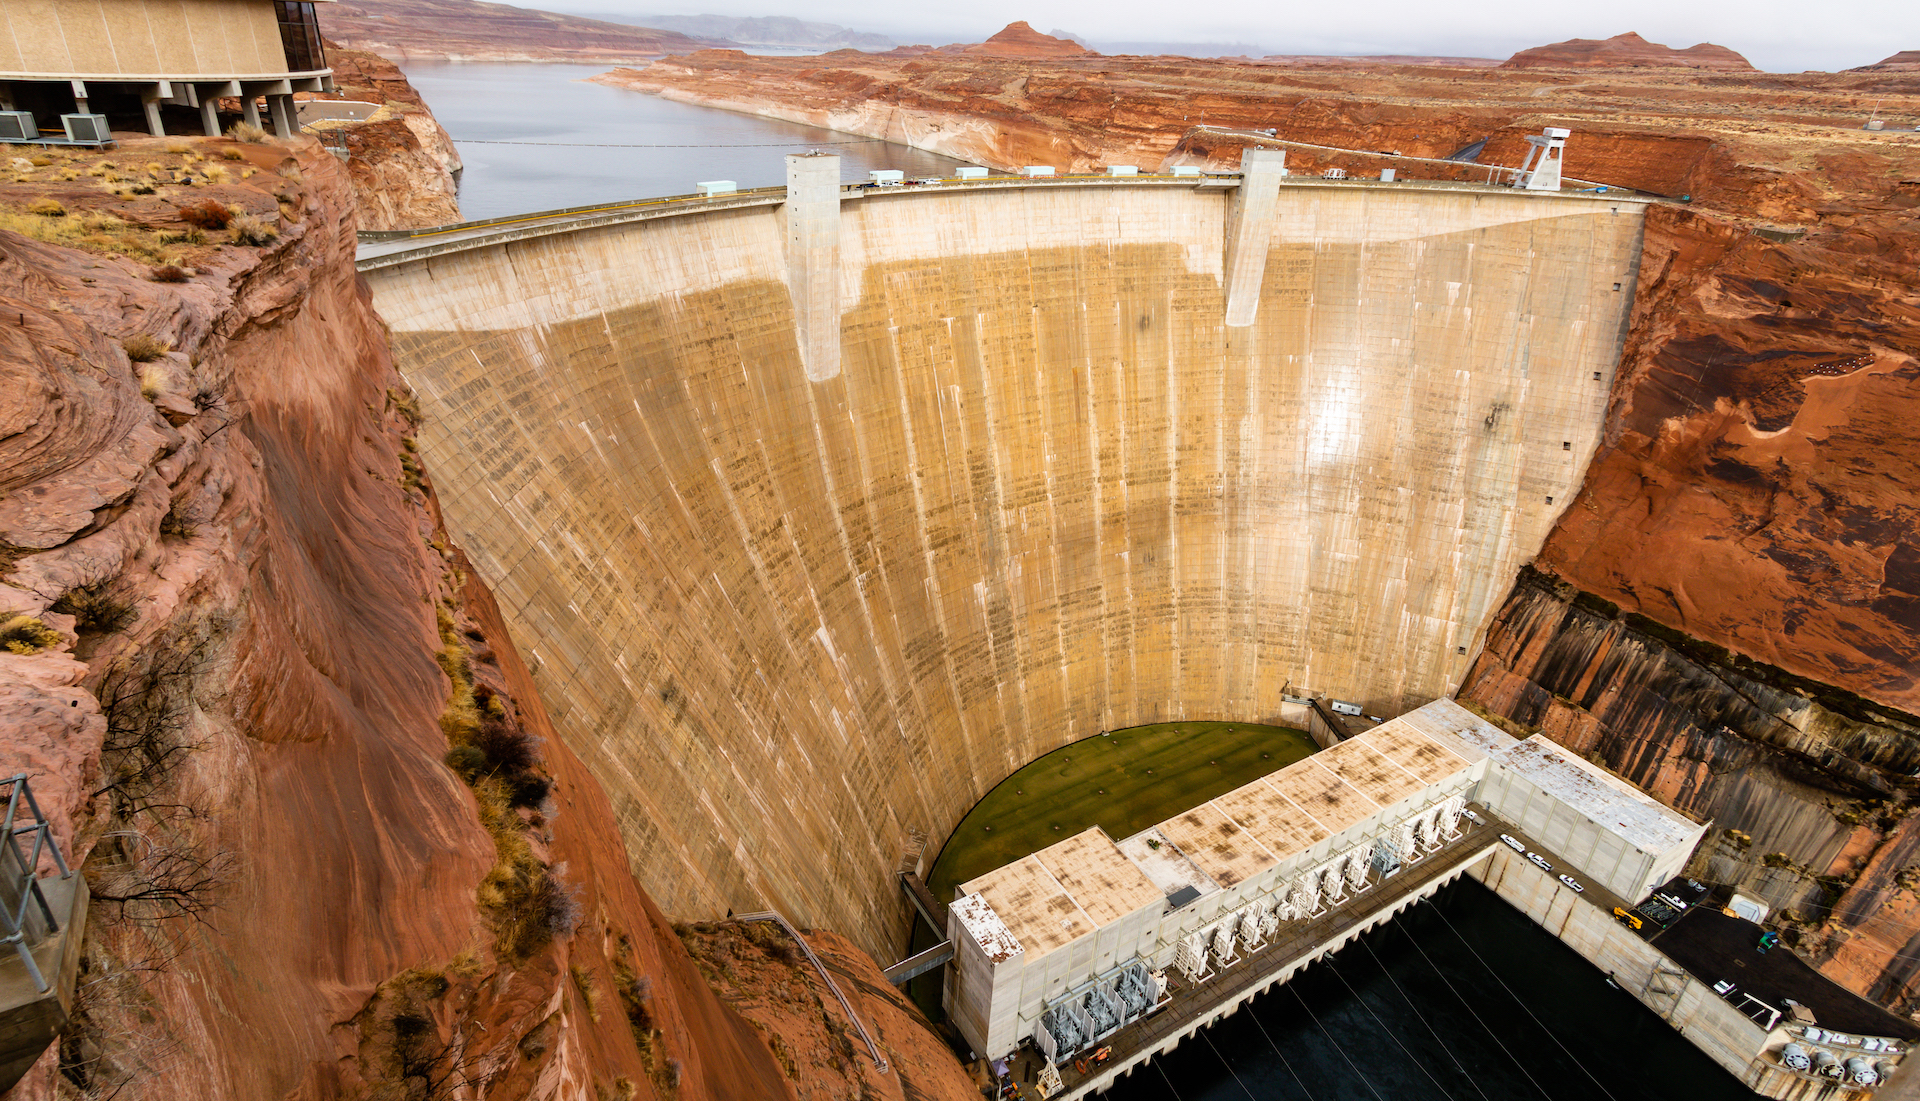 Water levels in Lake Powell are dipping dangerously close to "dead pool," at which point it becomes impossible to generate hydropower at the Glen Canyon dam. Experts think the reservoir could reach those levels within a year.